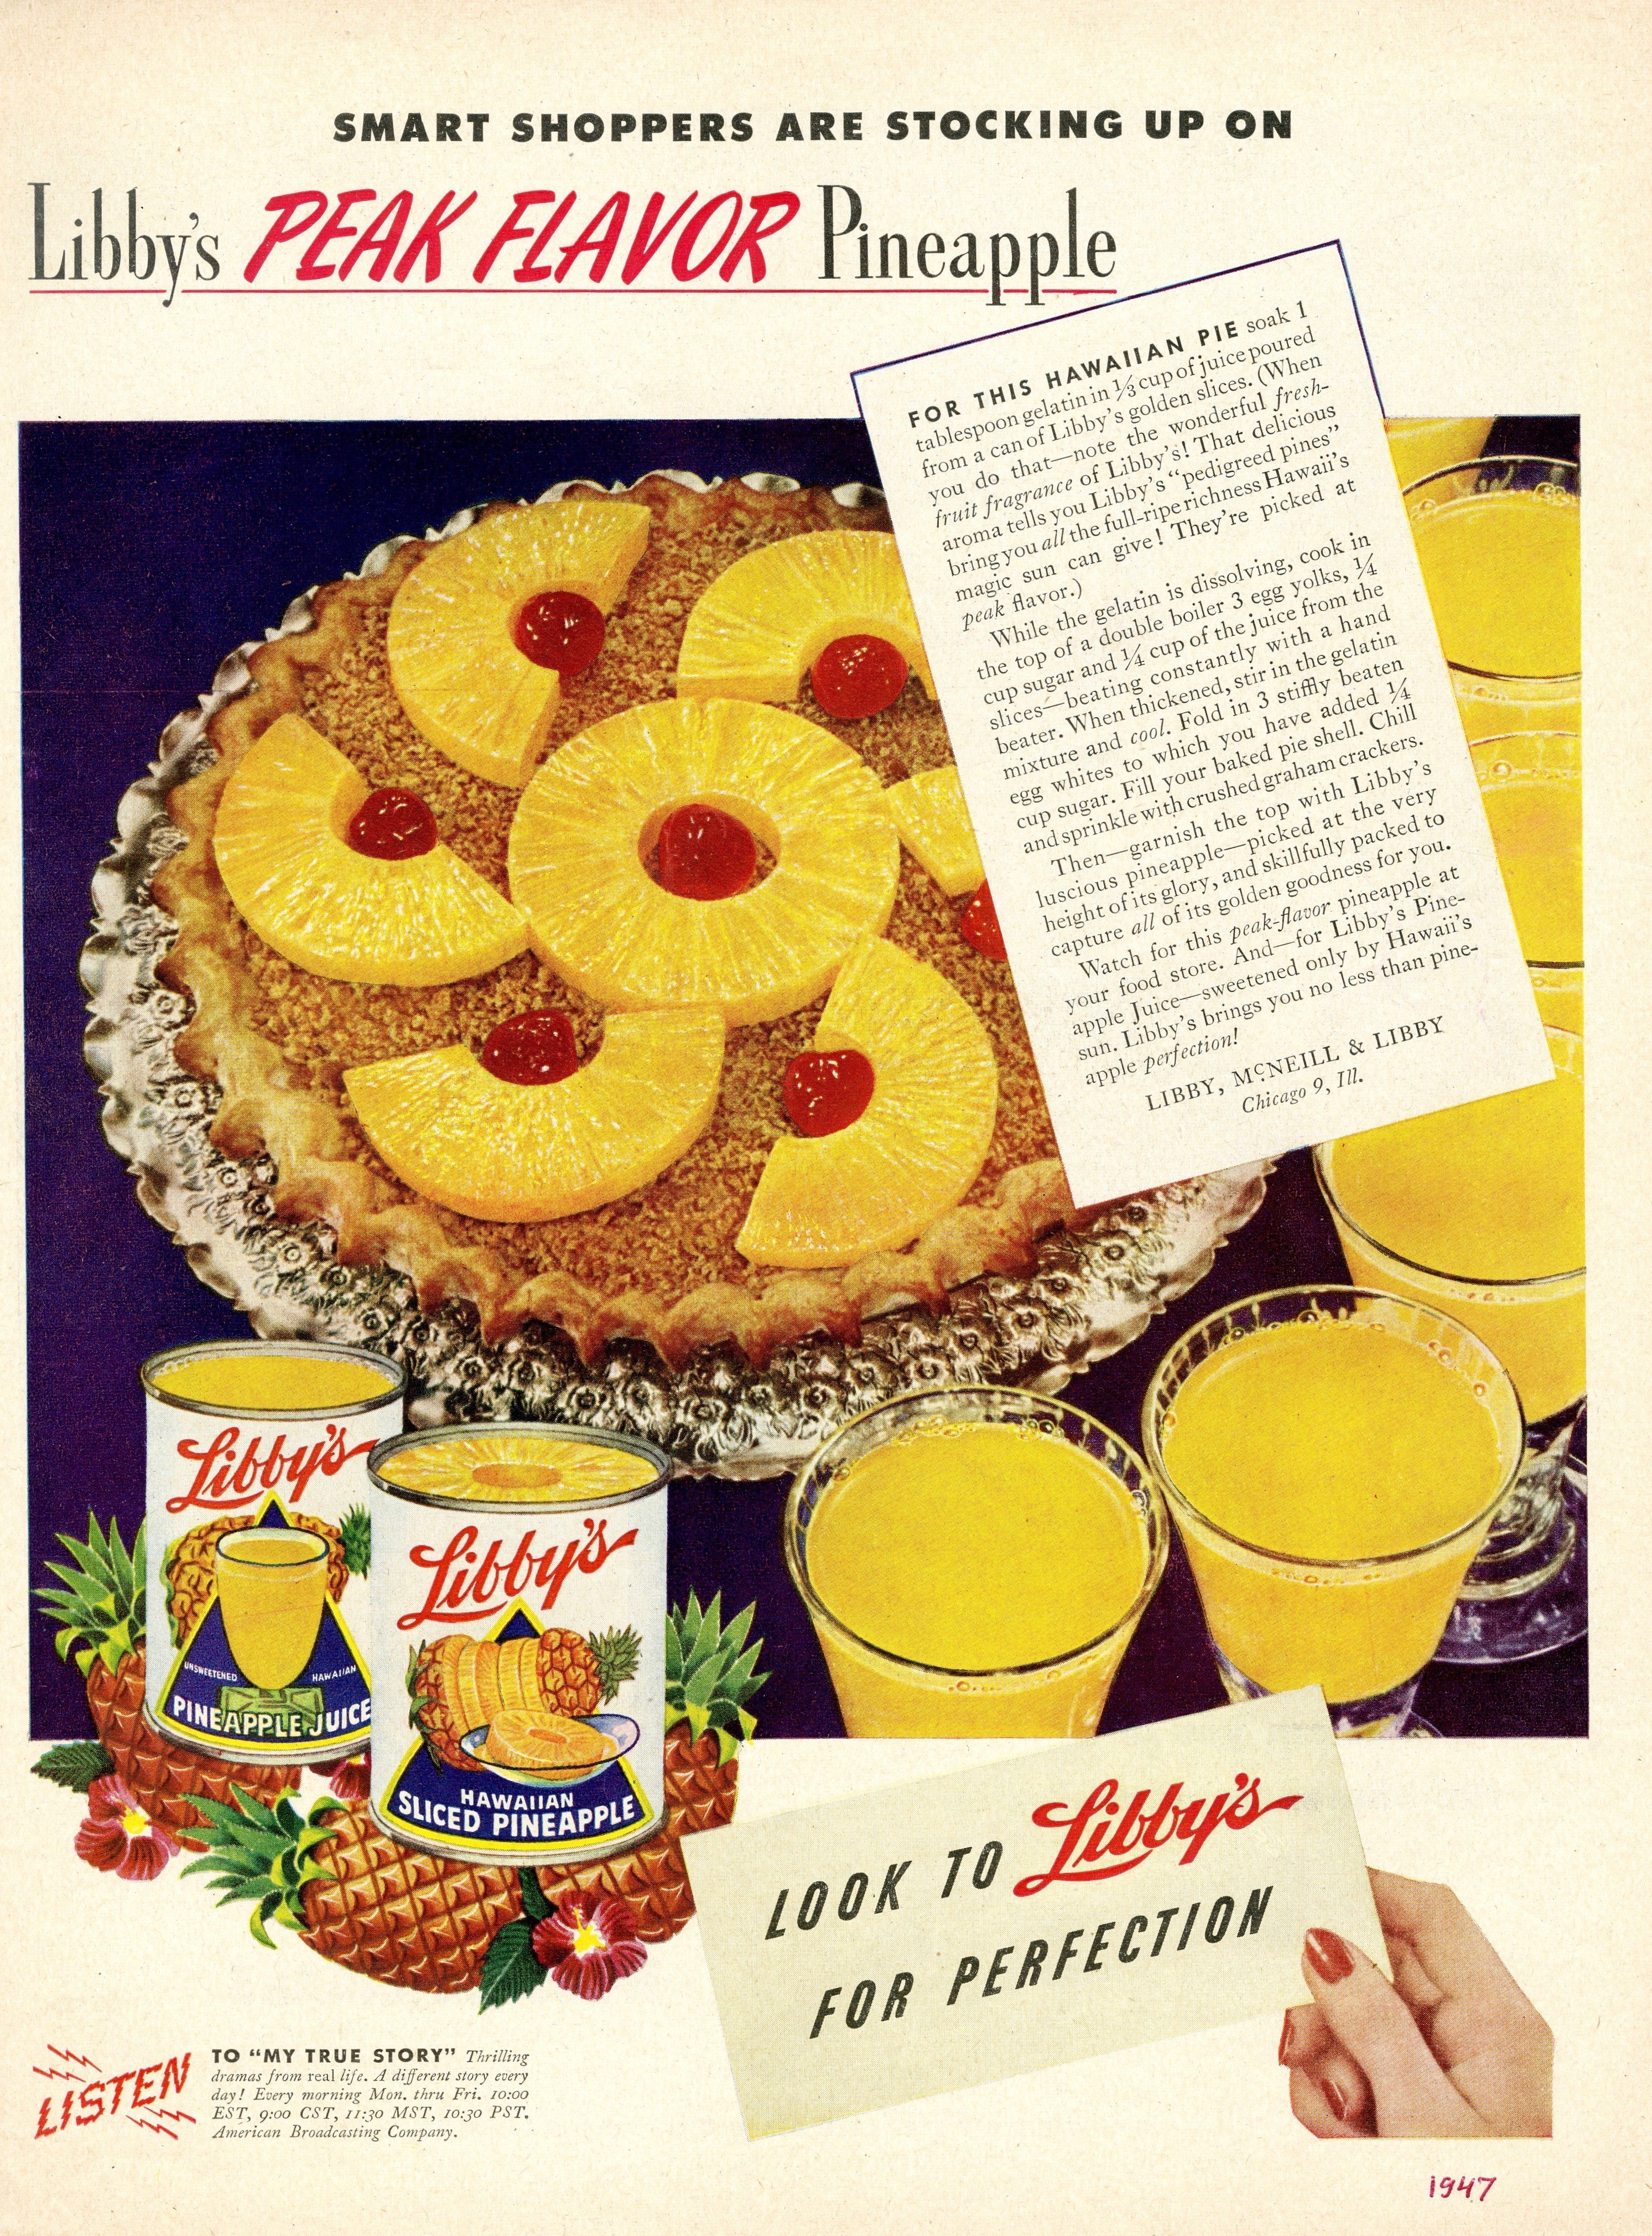 Advertisement for Libby's Pineapple, featuring pineapple upside down cake